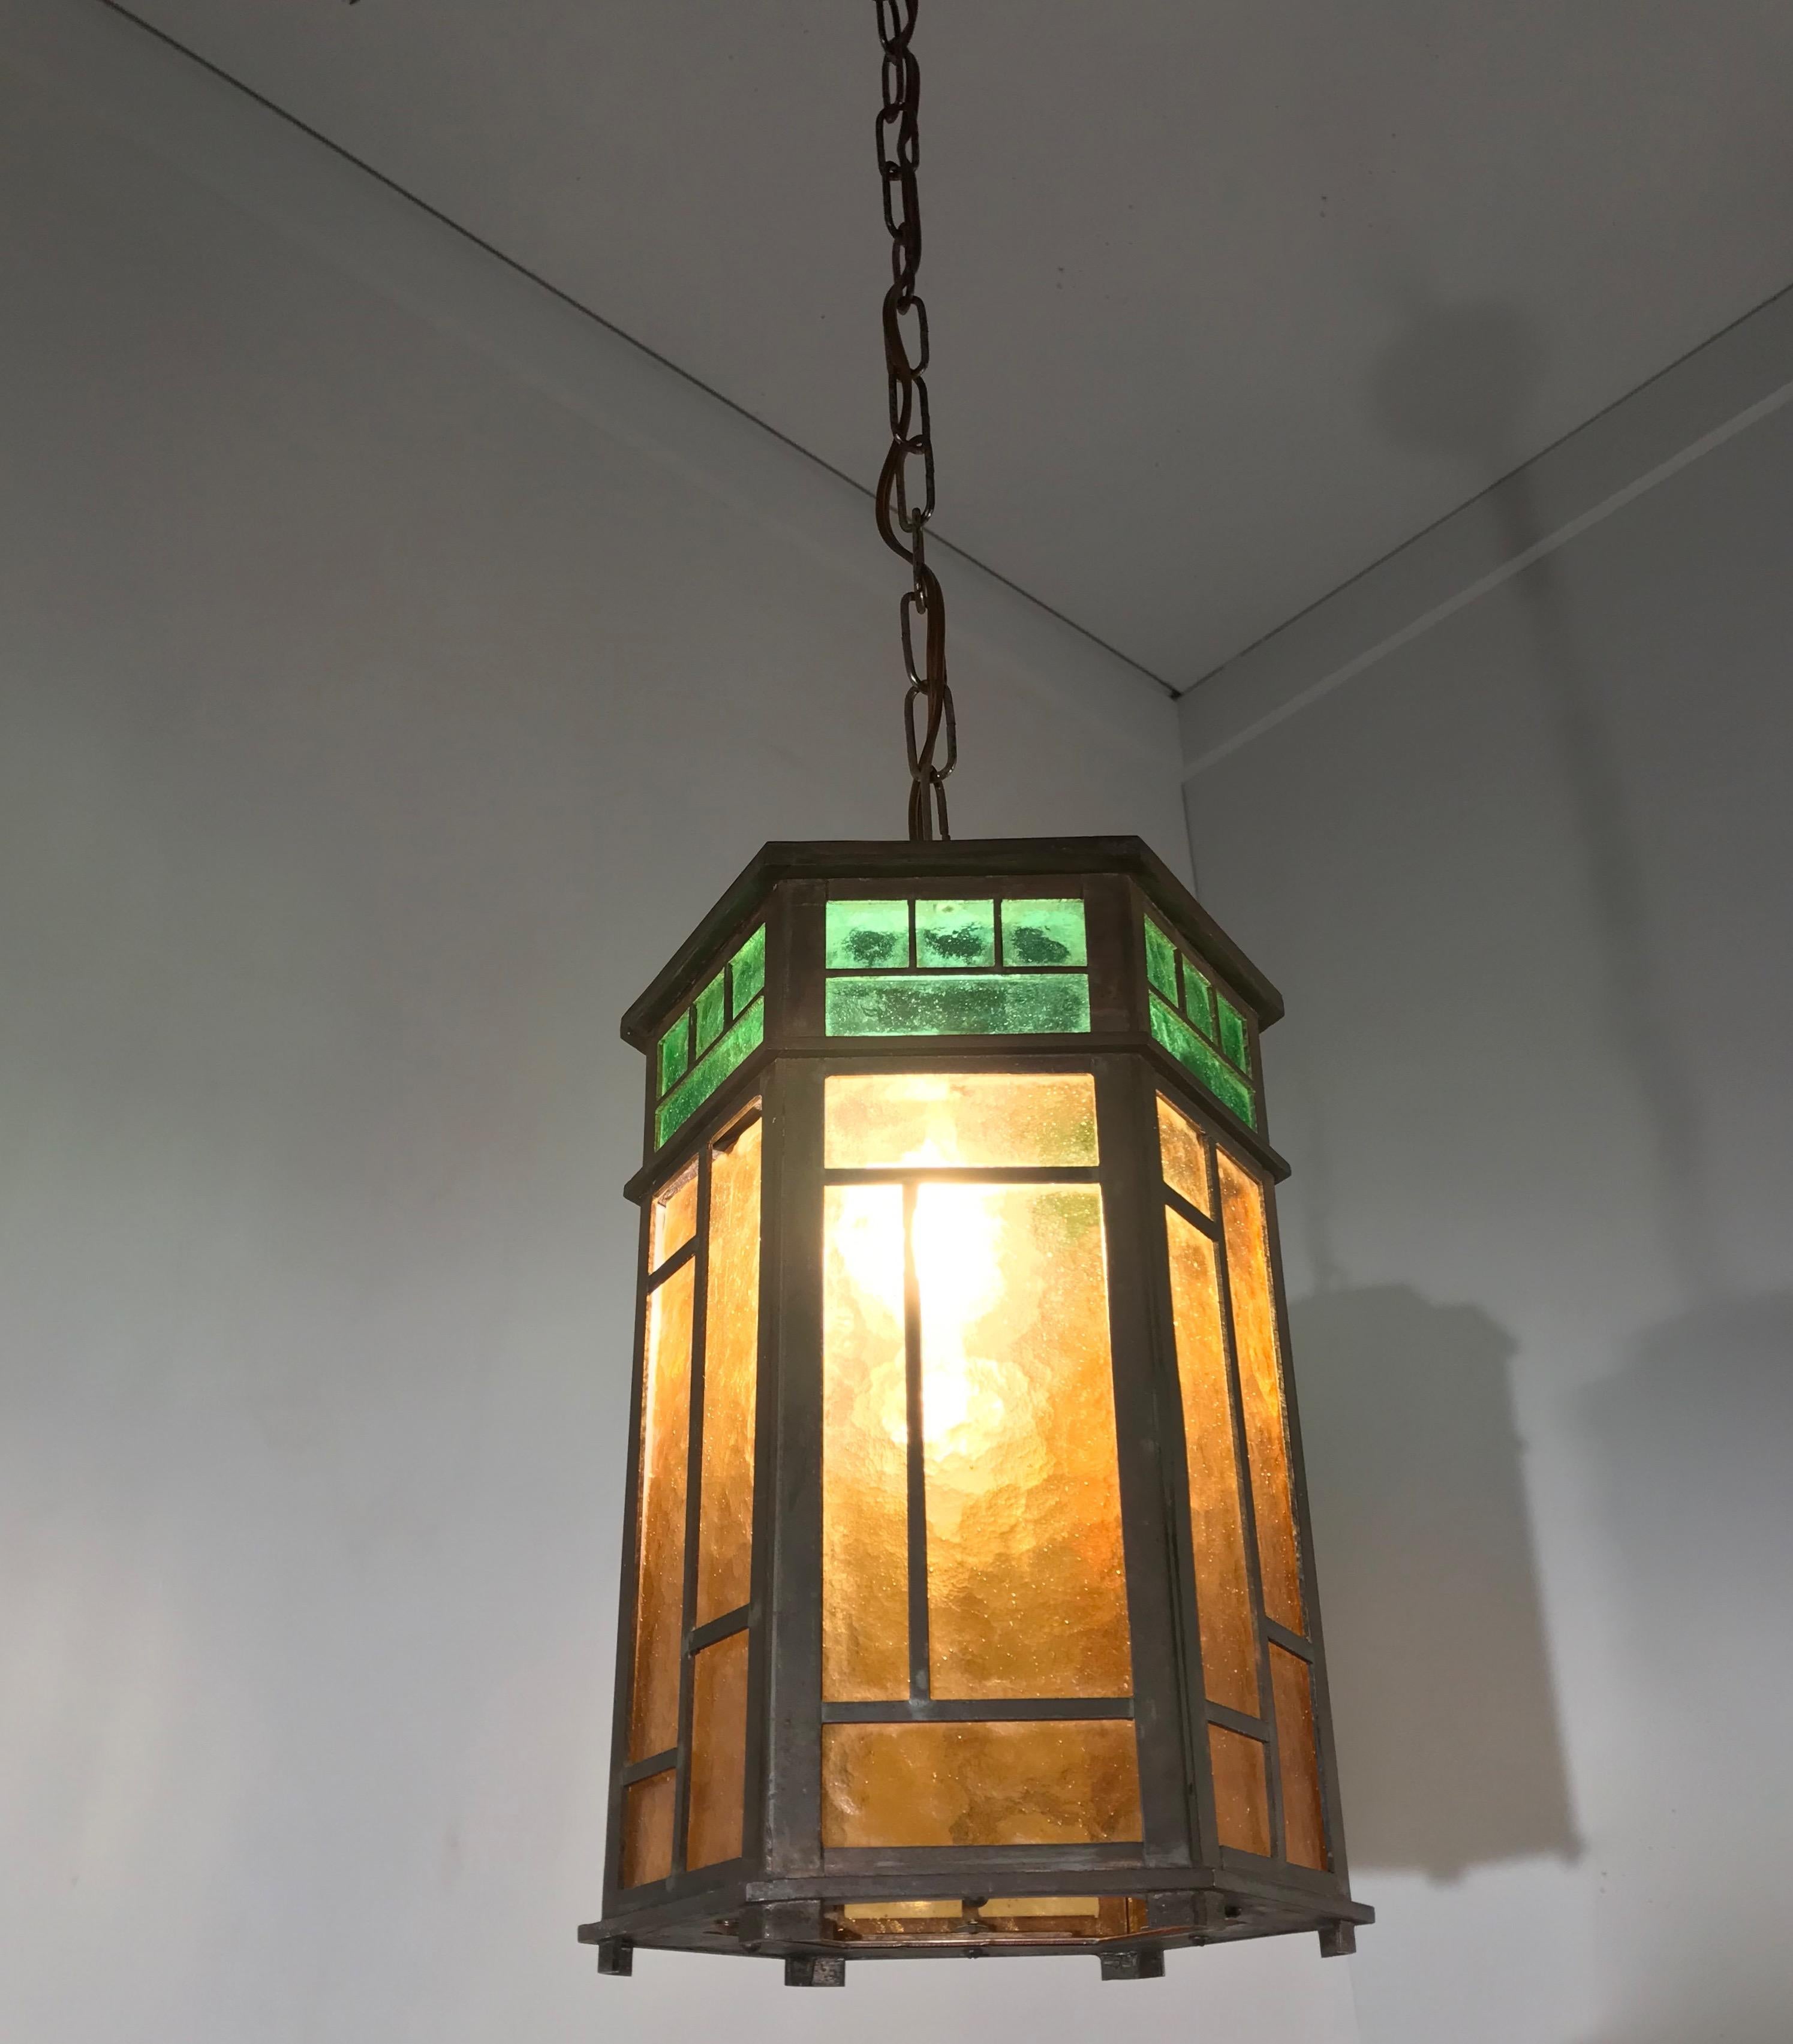 Top quality and small size, handcrafted entry hall light fixture.

With early 20th century lighting as one of our specialities, we are always happy to find a pendant, lantern or chandelier that we have never seen before. This late Arts & Crafts and